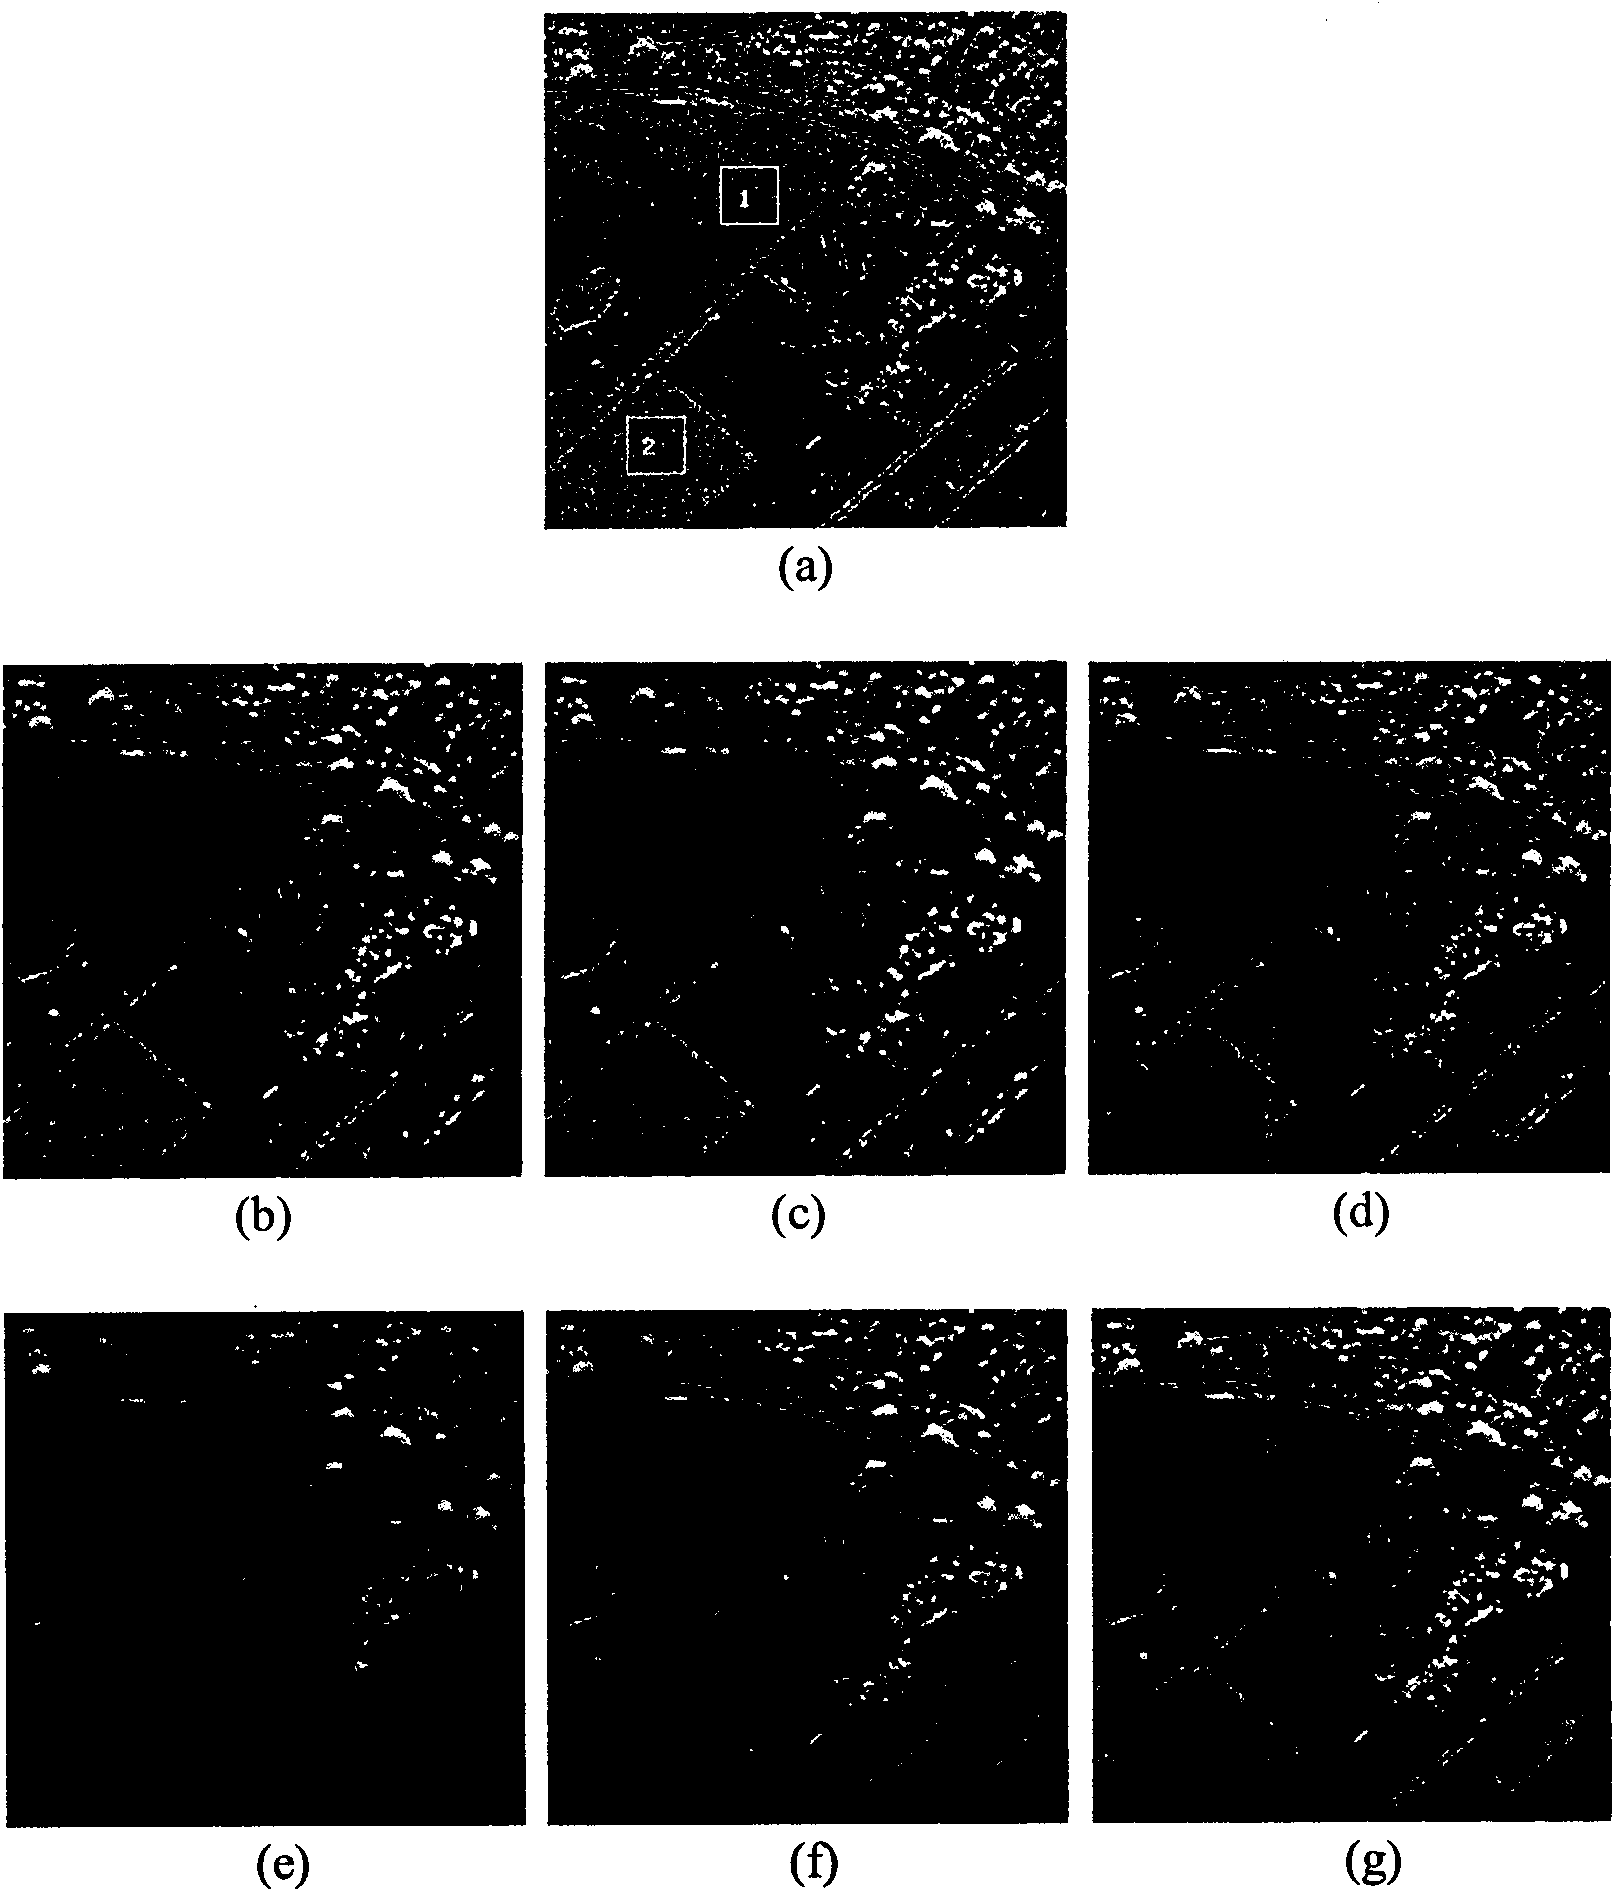 SAR image noise suppression method based on direction wave domain mixture Gaussian model